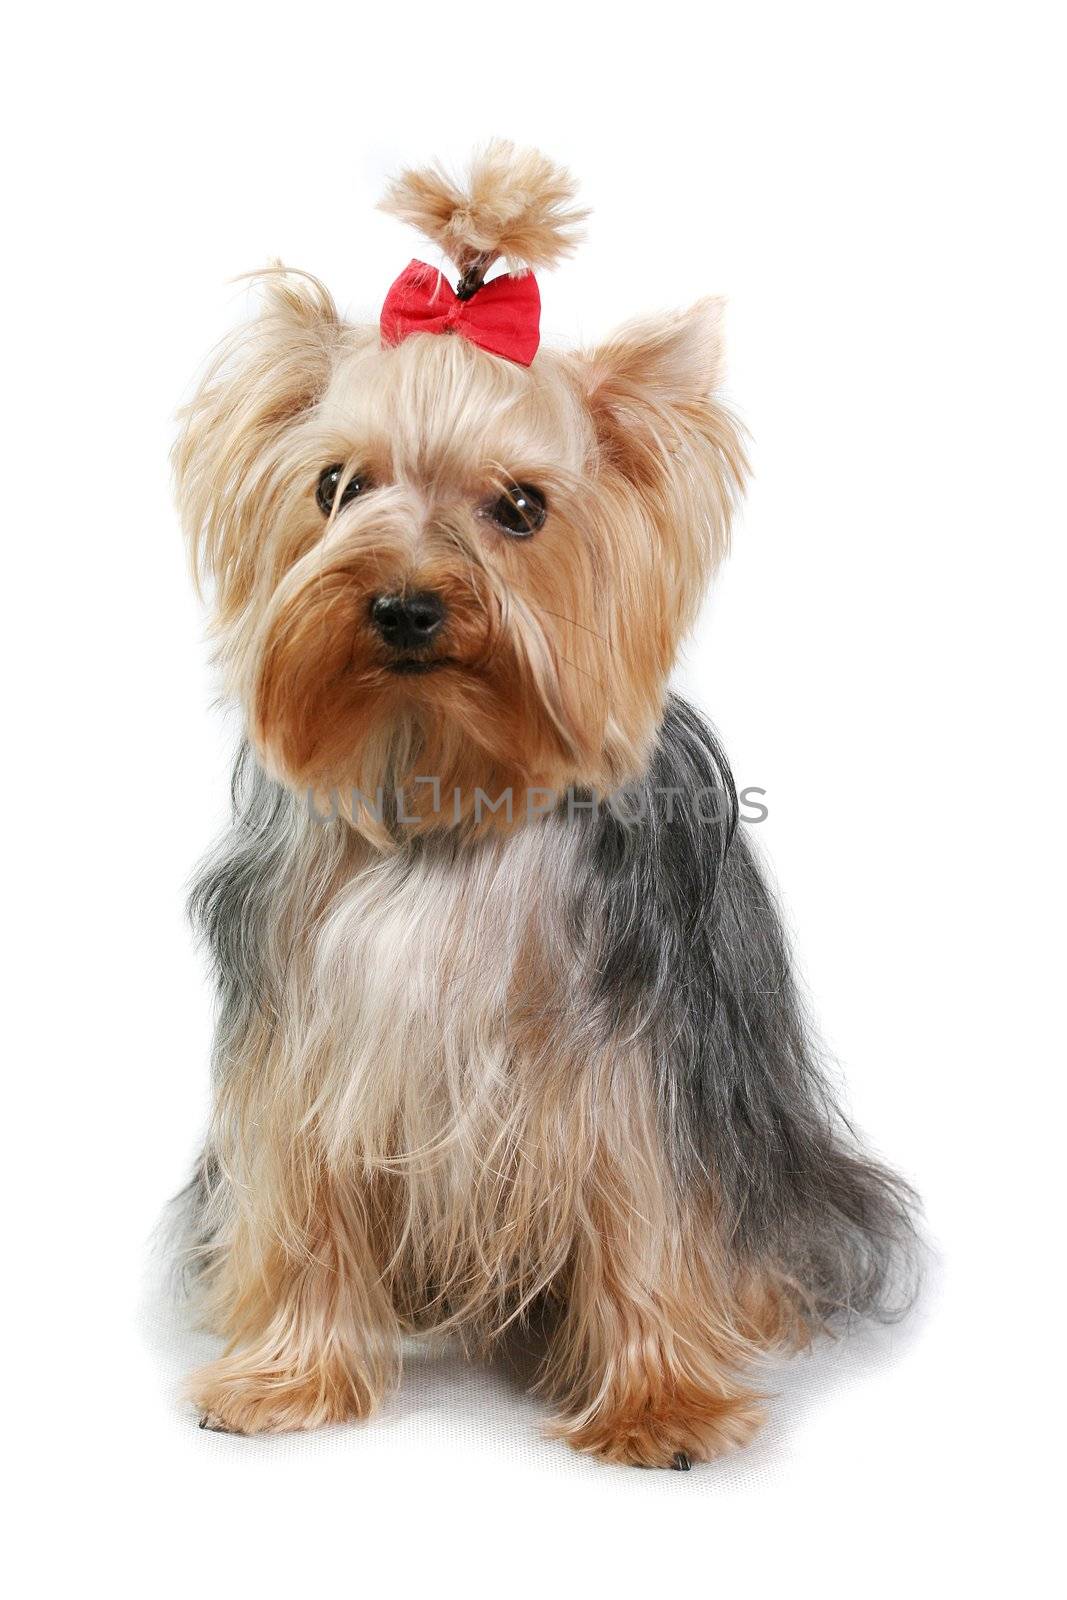 yorkshire terrier fine dog small youth pets isolate